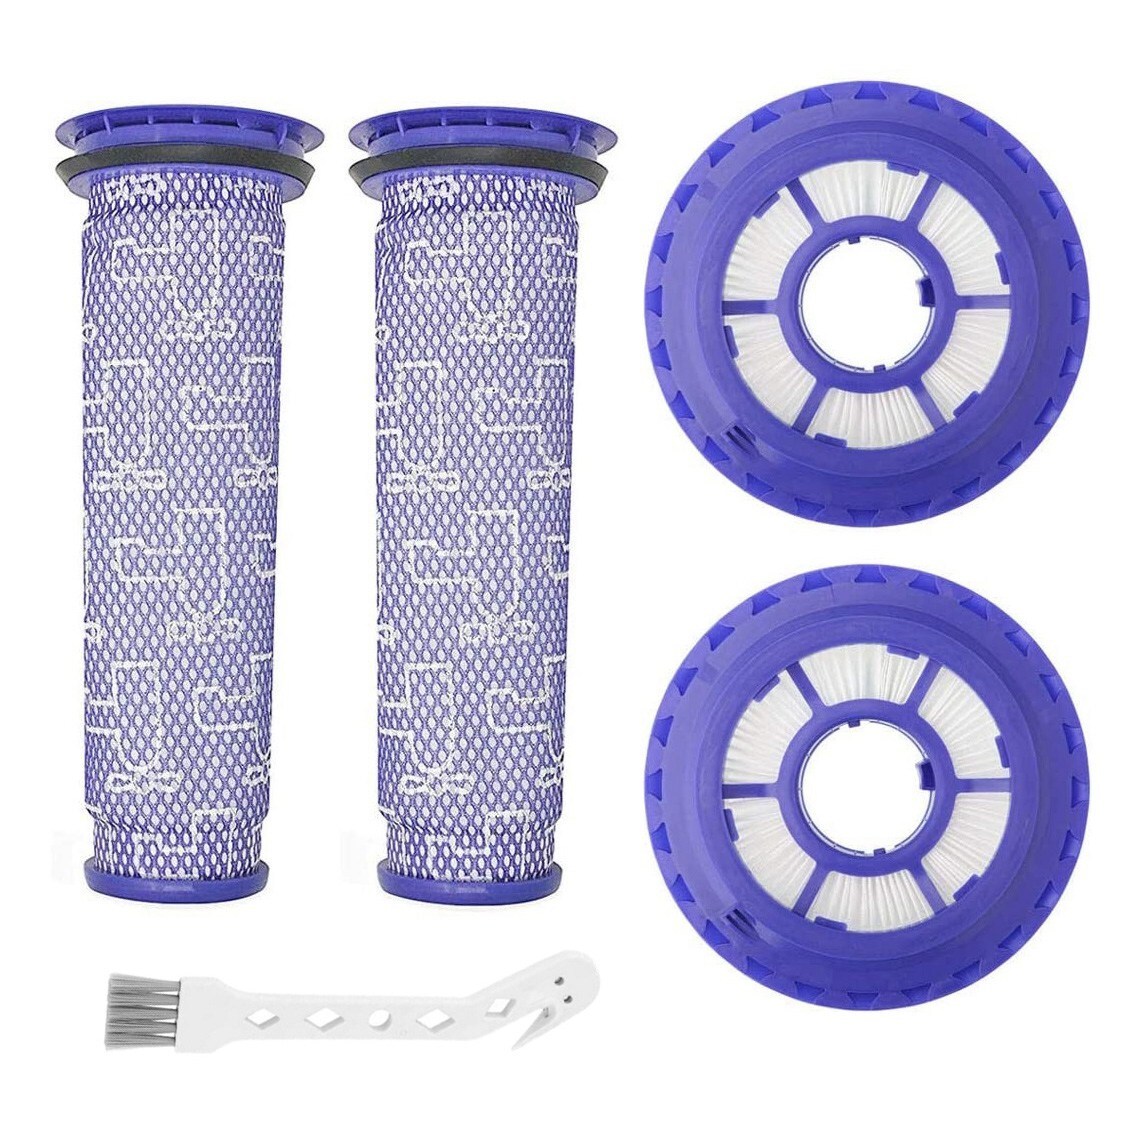 Post filters. 2 Pack pre-Filters and 2 Pack HEPA Post-Filters Replacements compatible Dyson v8 and v7 Cordless Vacuum Cleaners.